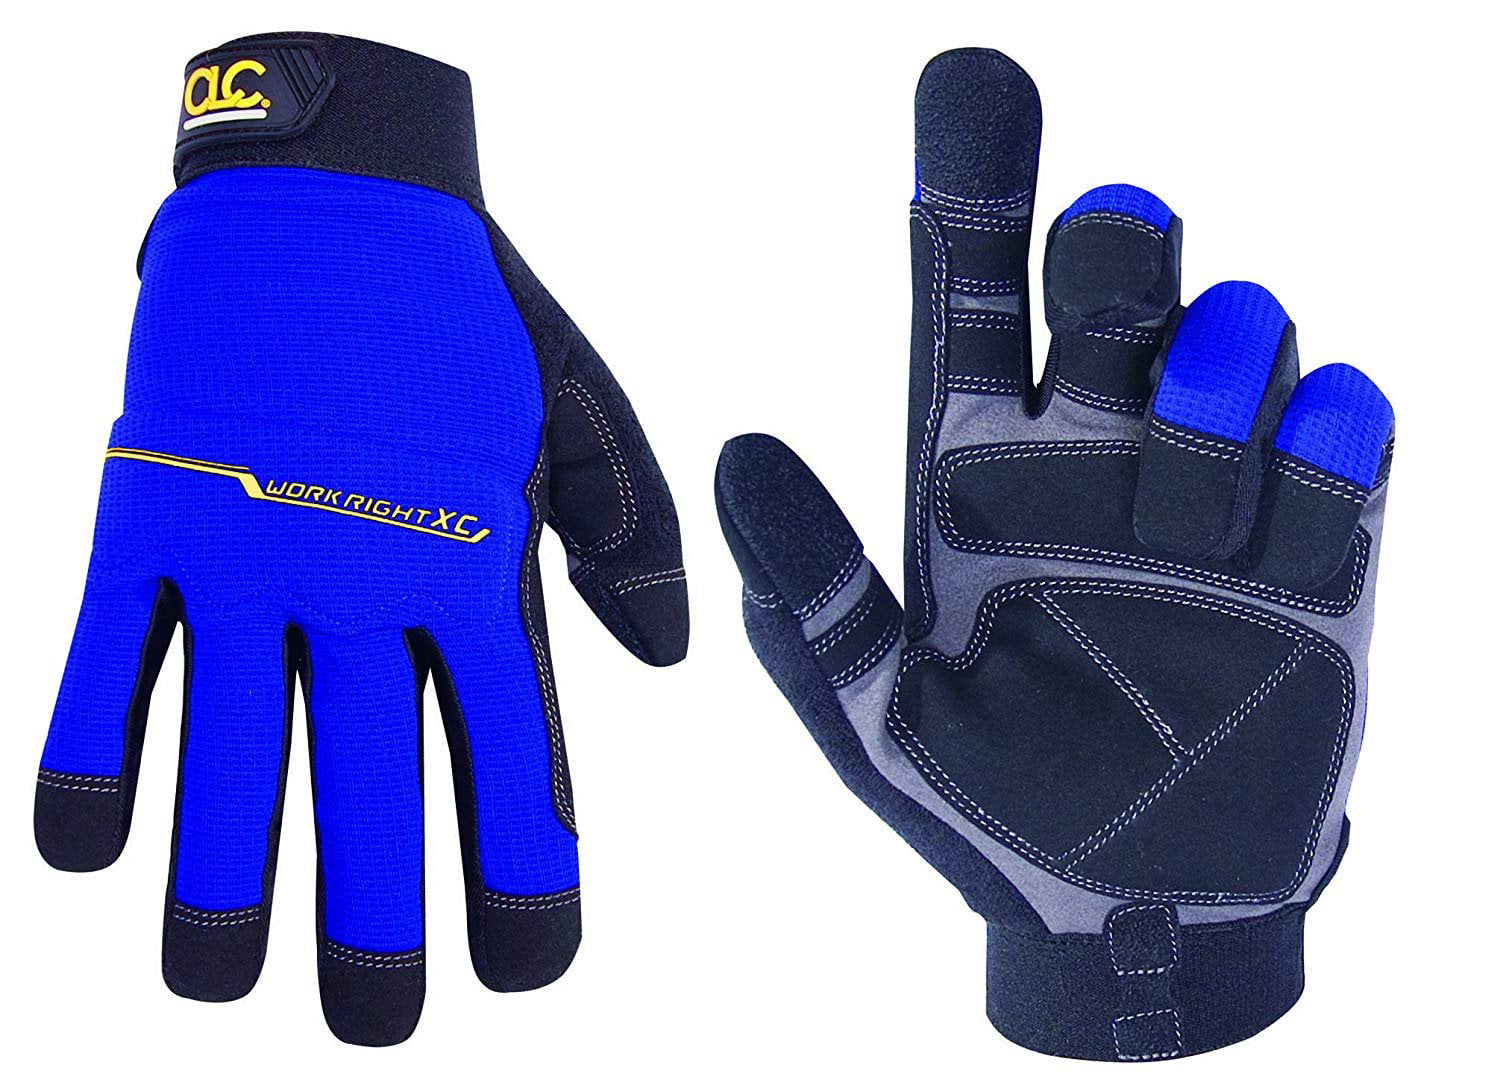 Stanley Extreme Performance Impact Gloves TPR Knuckle Protection PVC Palm Large